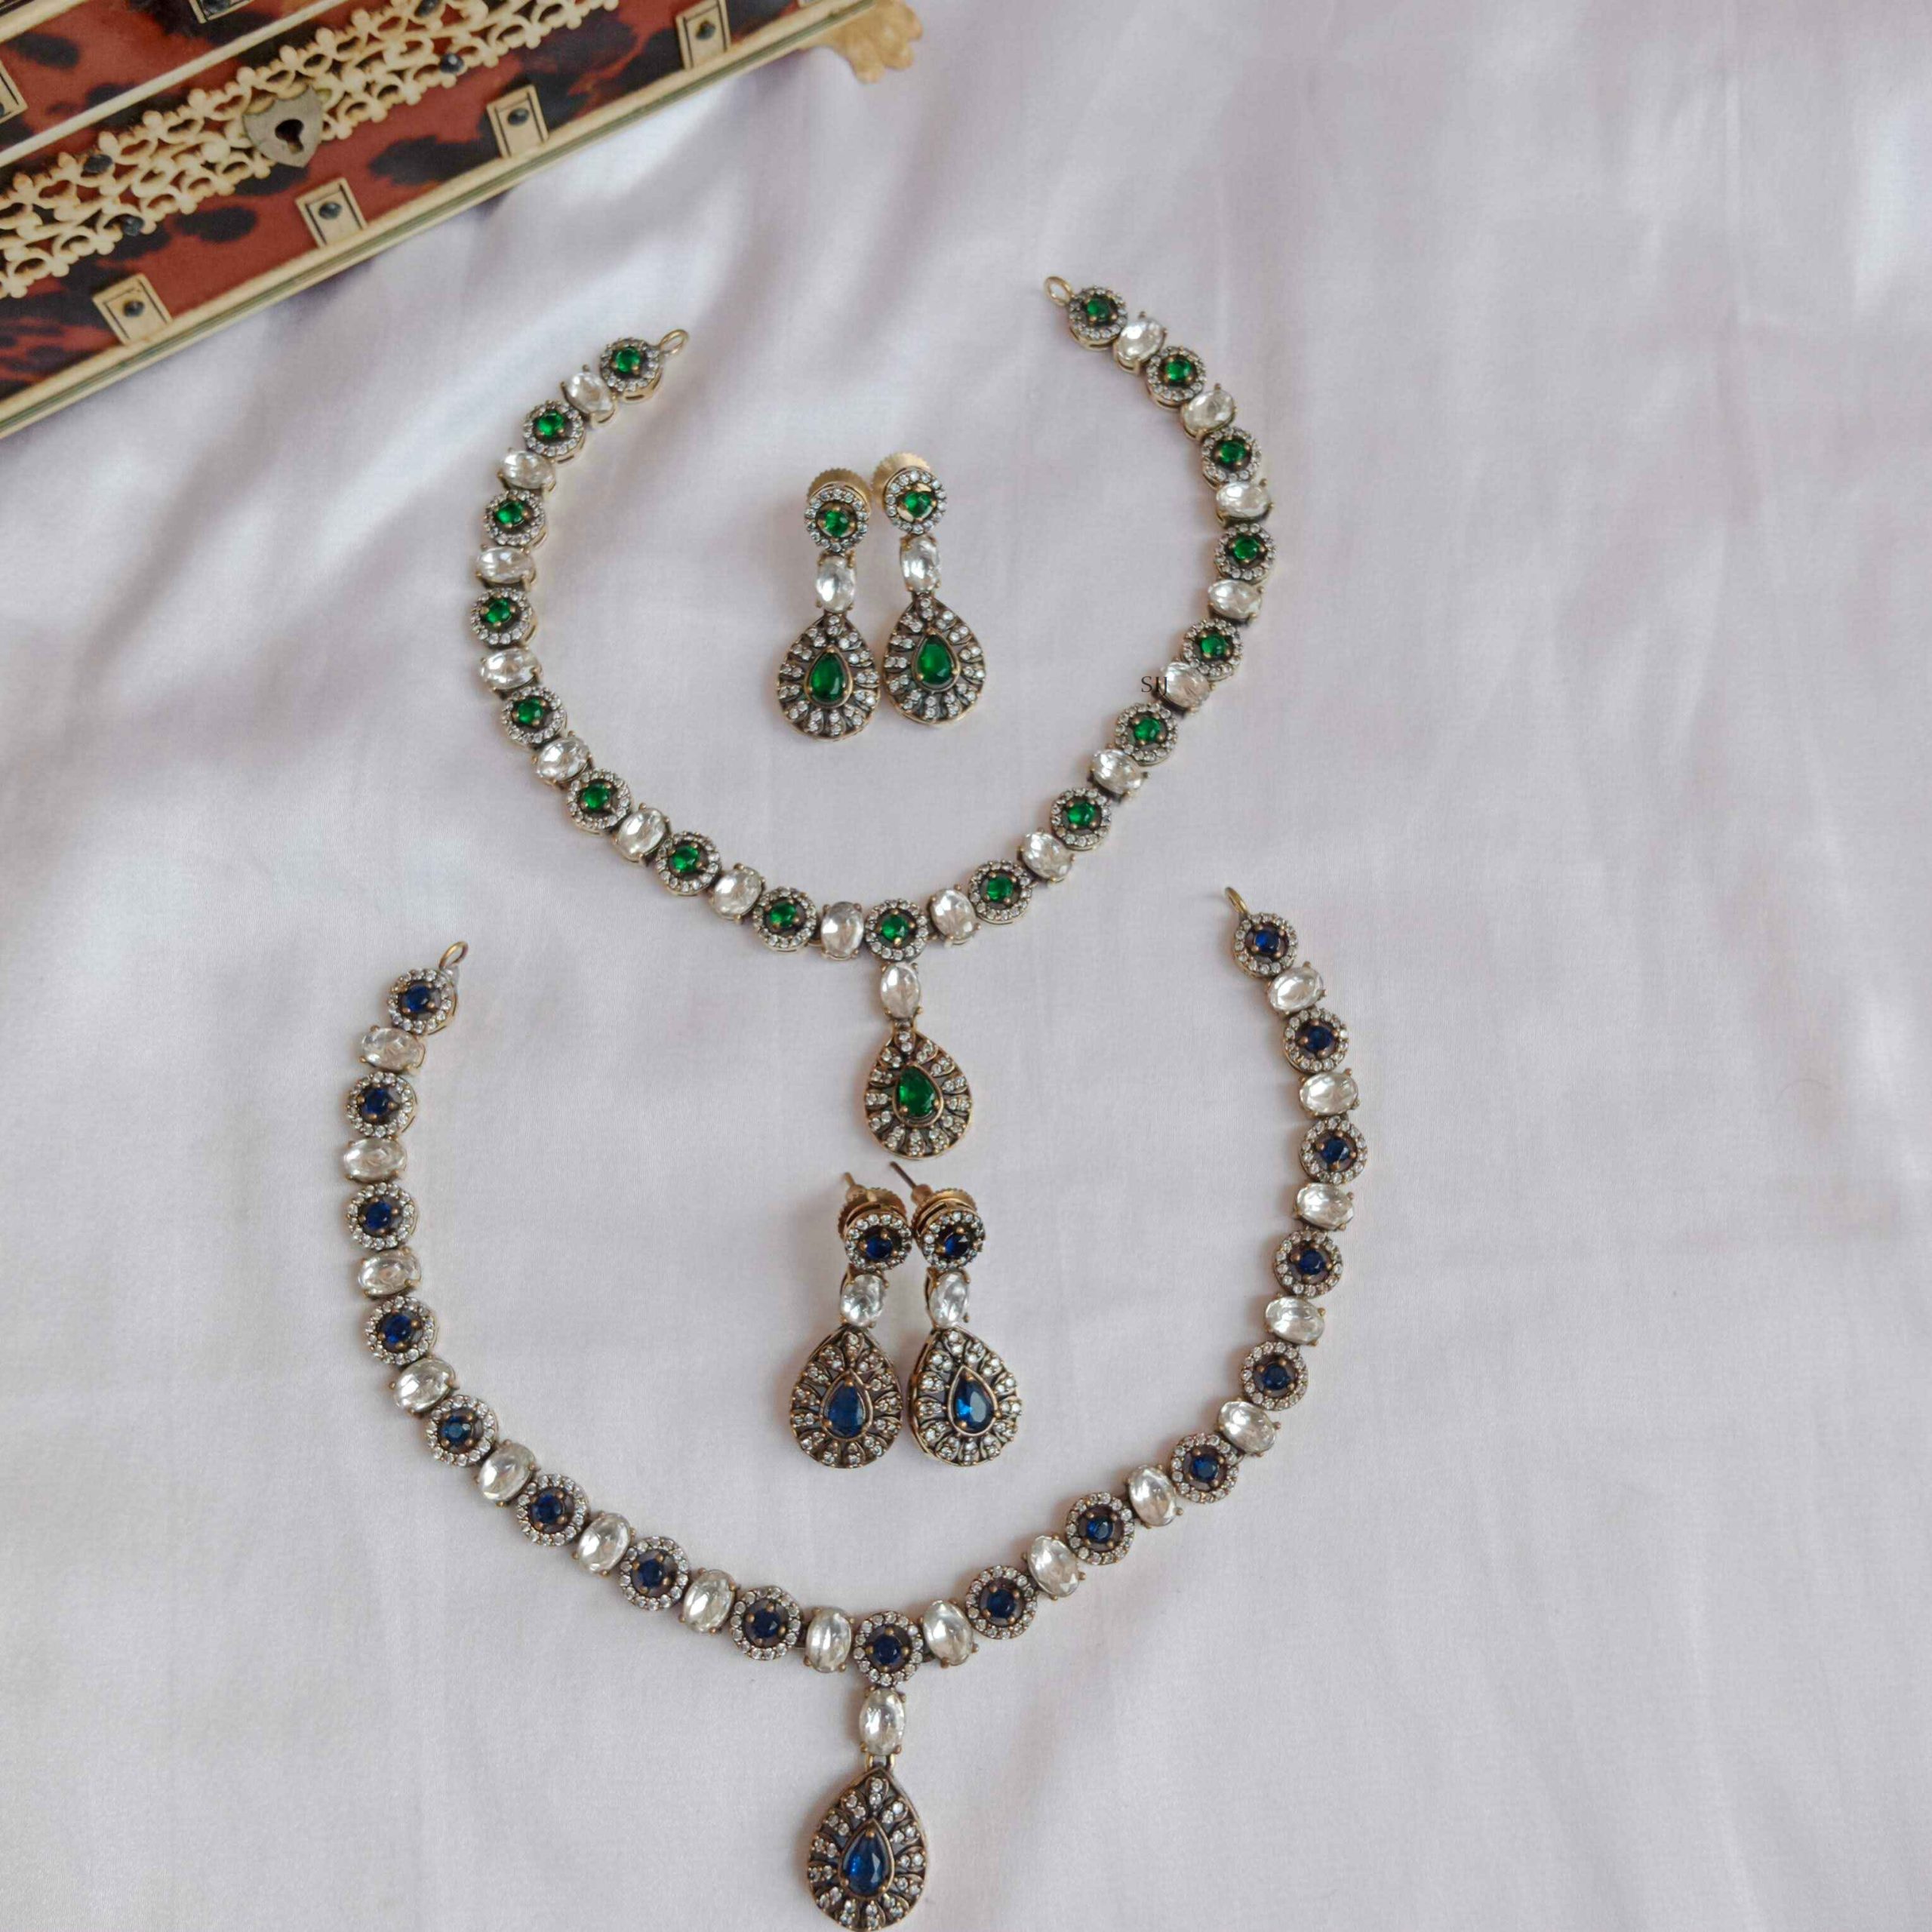 Imitation Victorian Necklace with Emerald and Sapphire